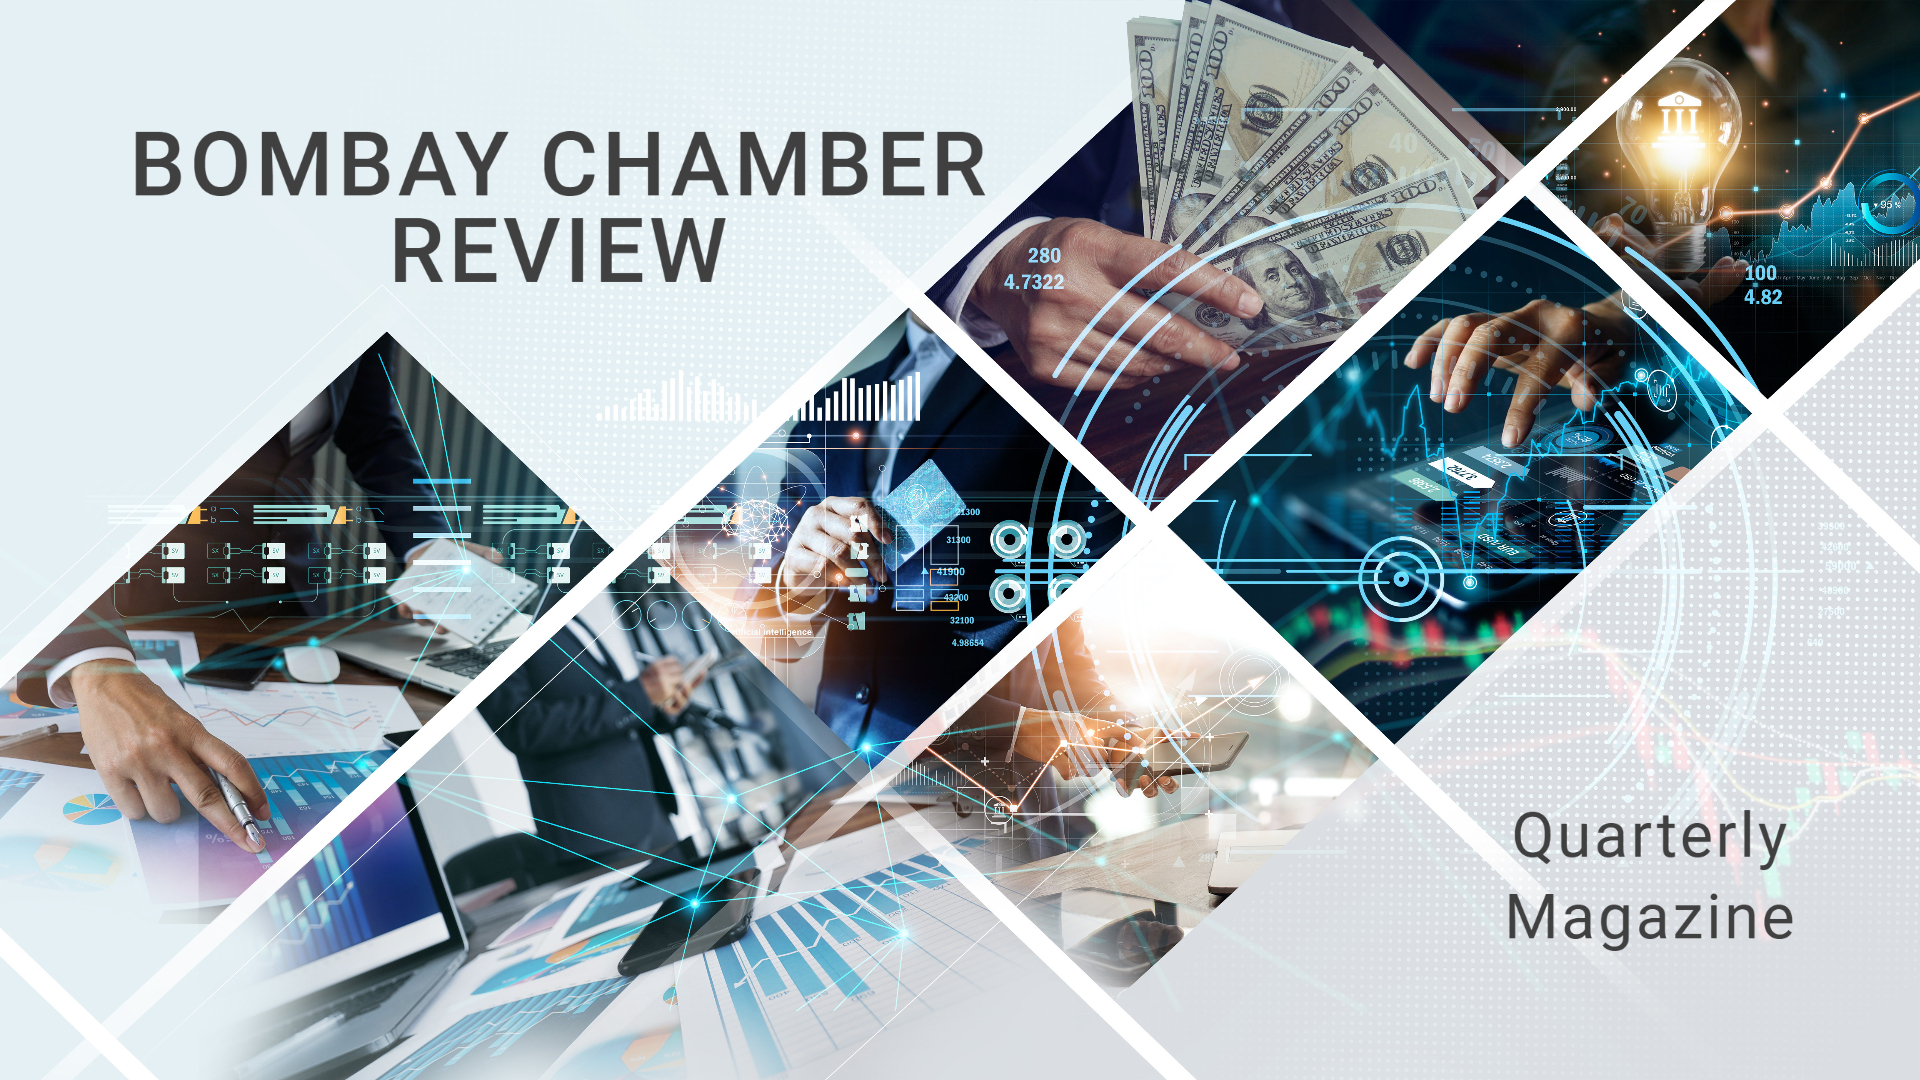 BOMBAY CHAMBER REVIEW